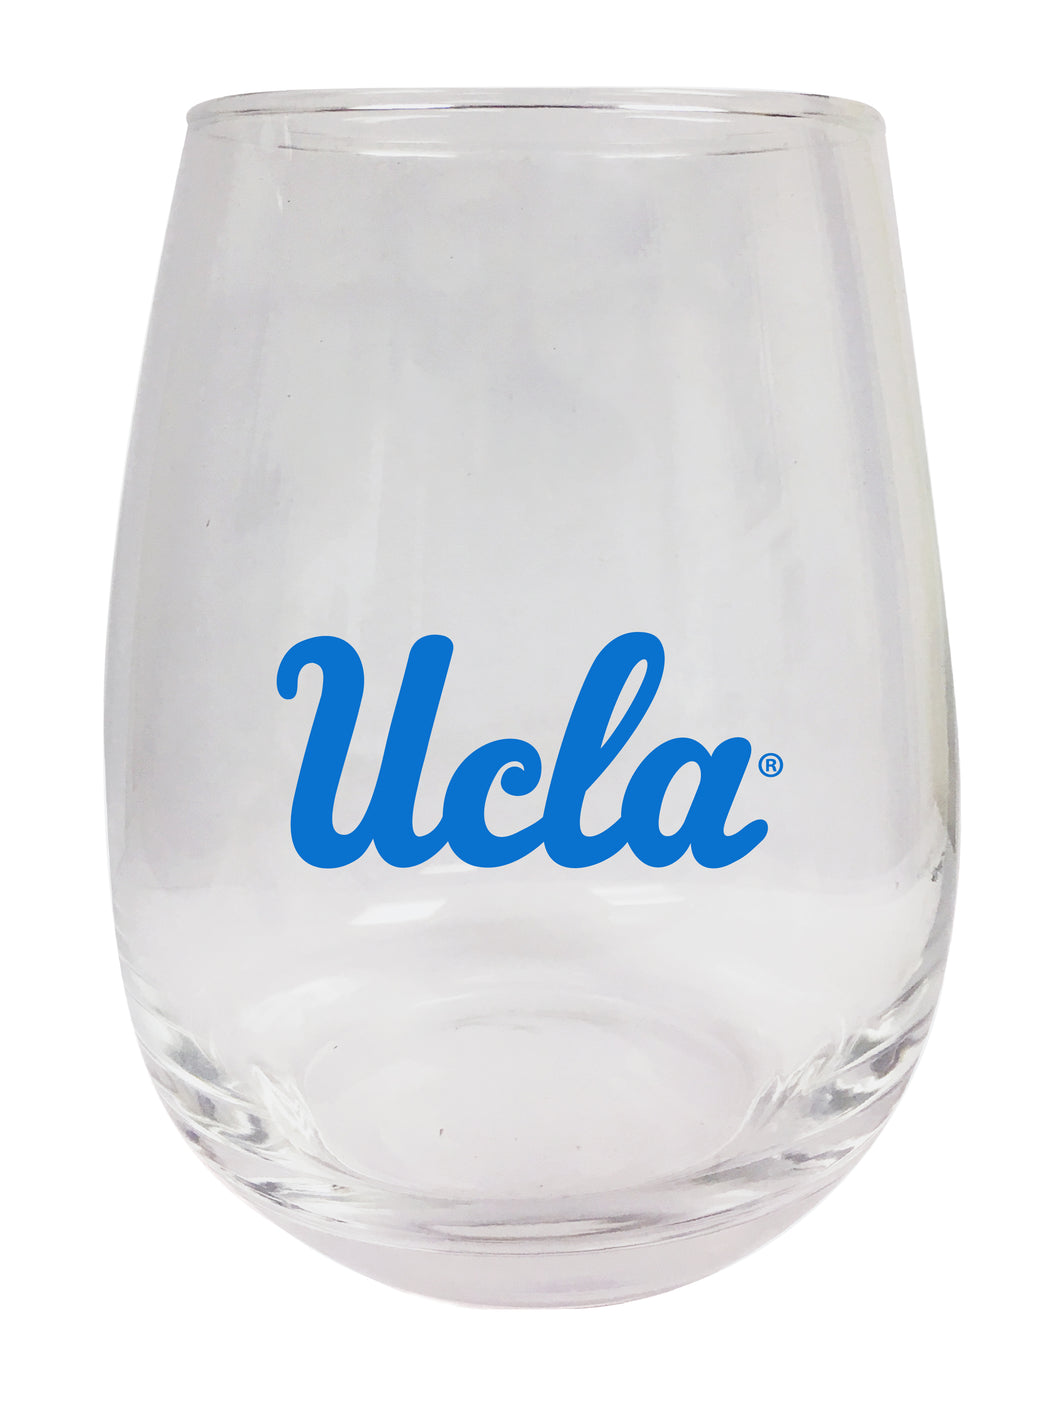 UCLA Bruins Stemless Wine Glass - 9 oz. | Officially Licensed NCAA Merchandise